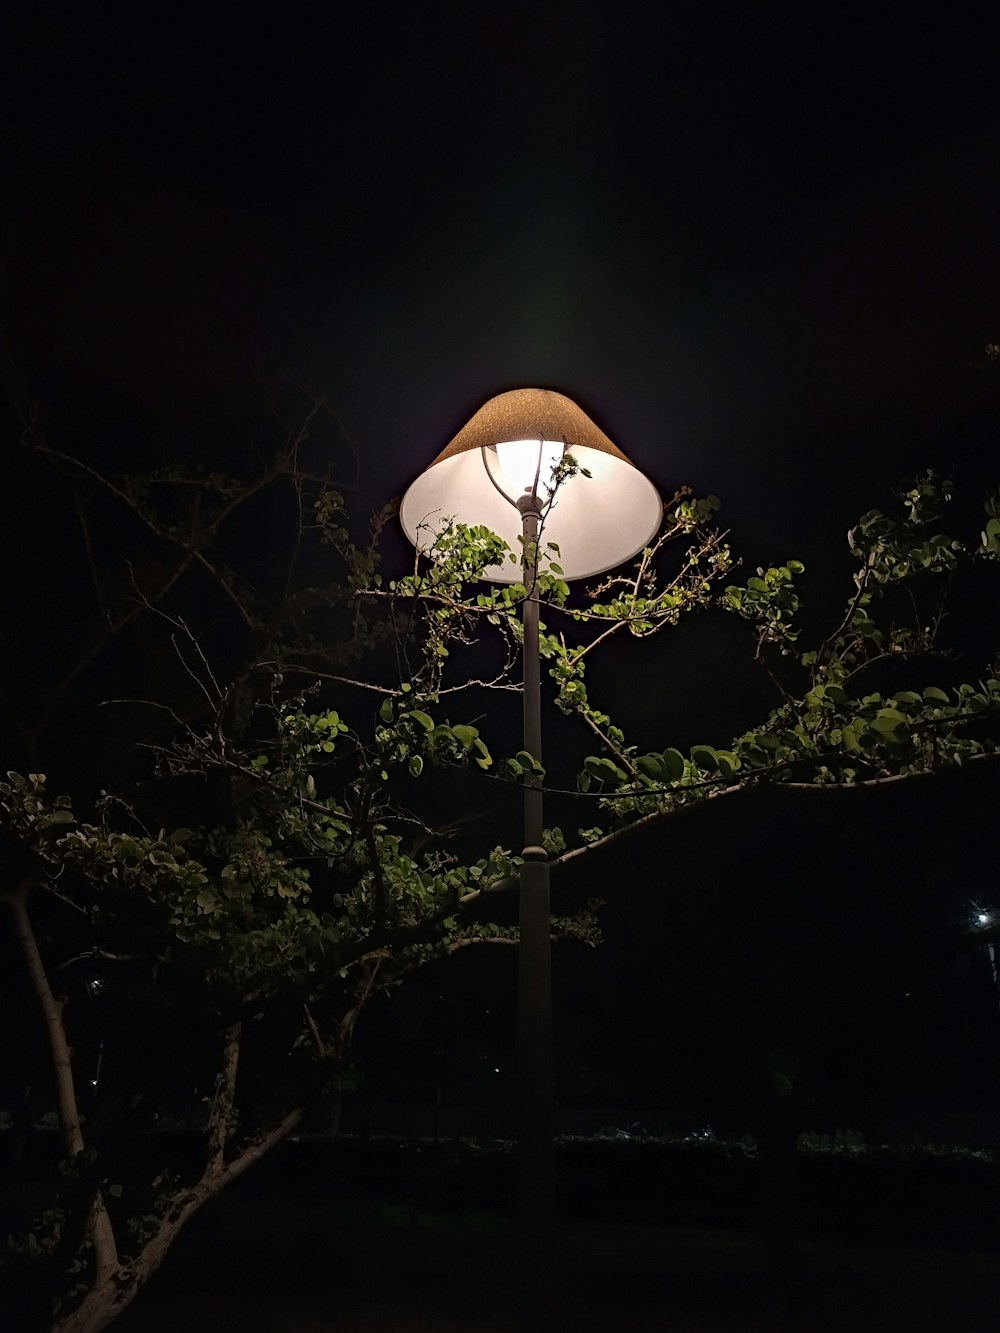 a lamp on a pole in the dark